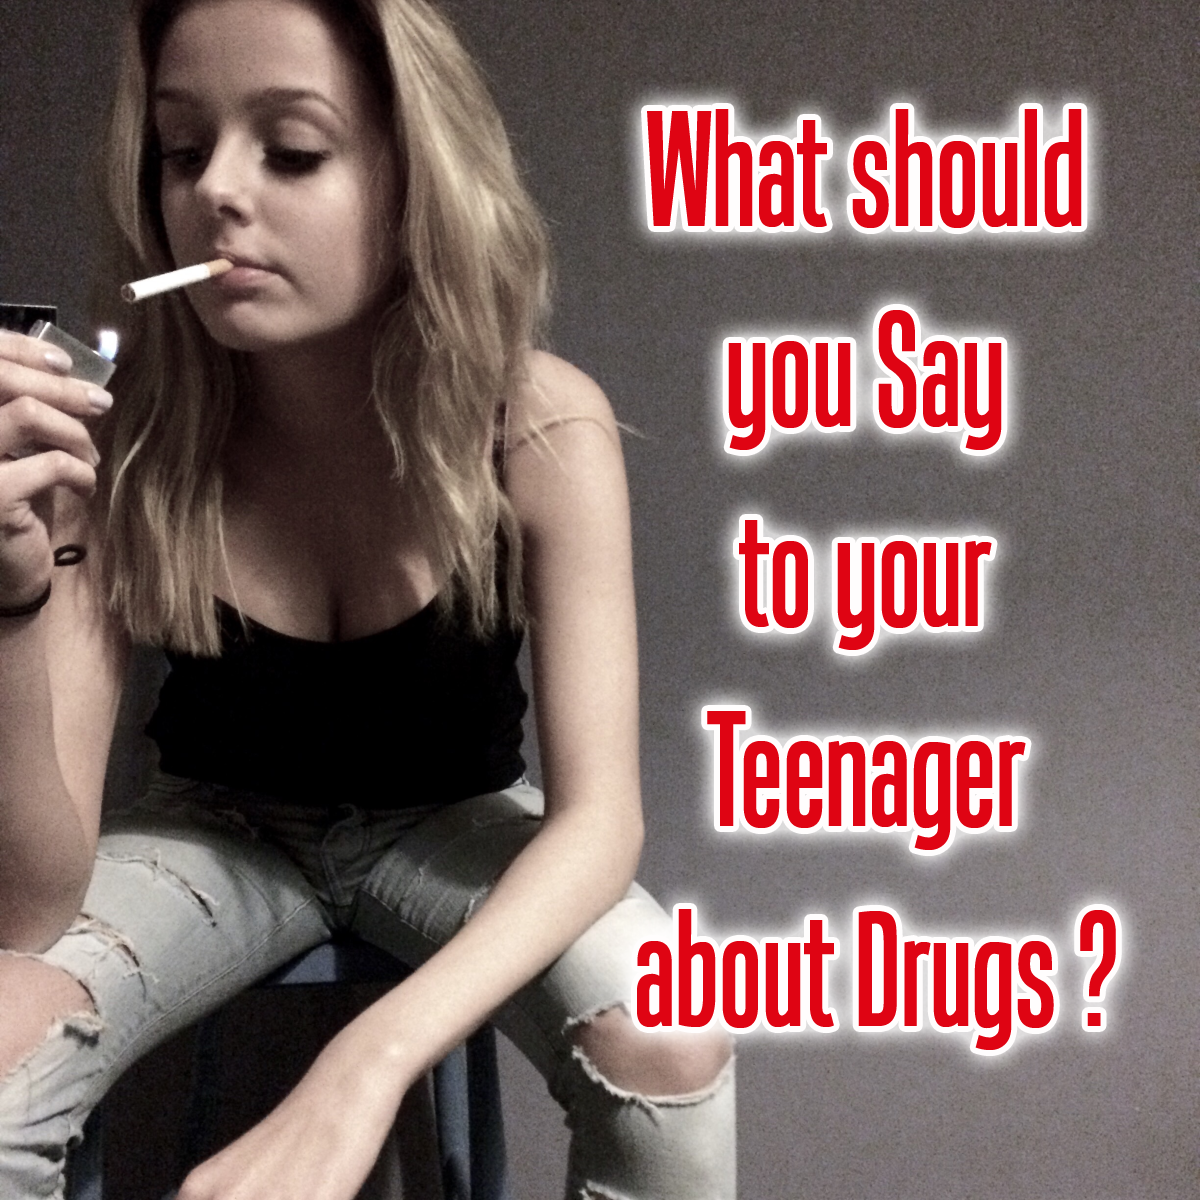 What should you say to your teen about drugs?